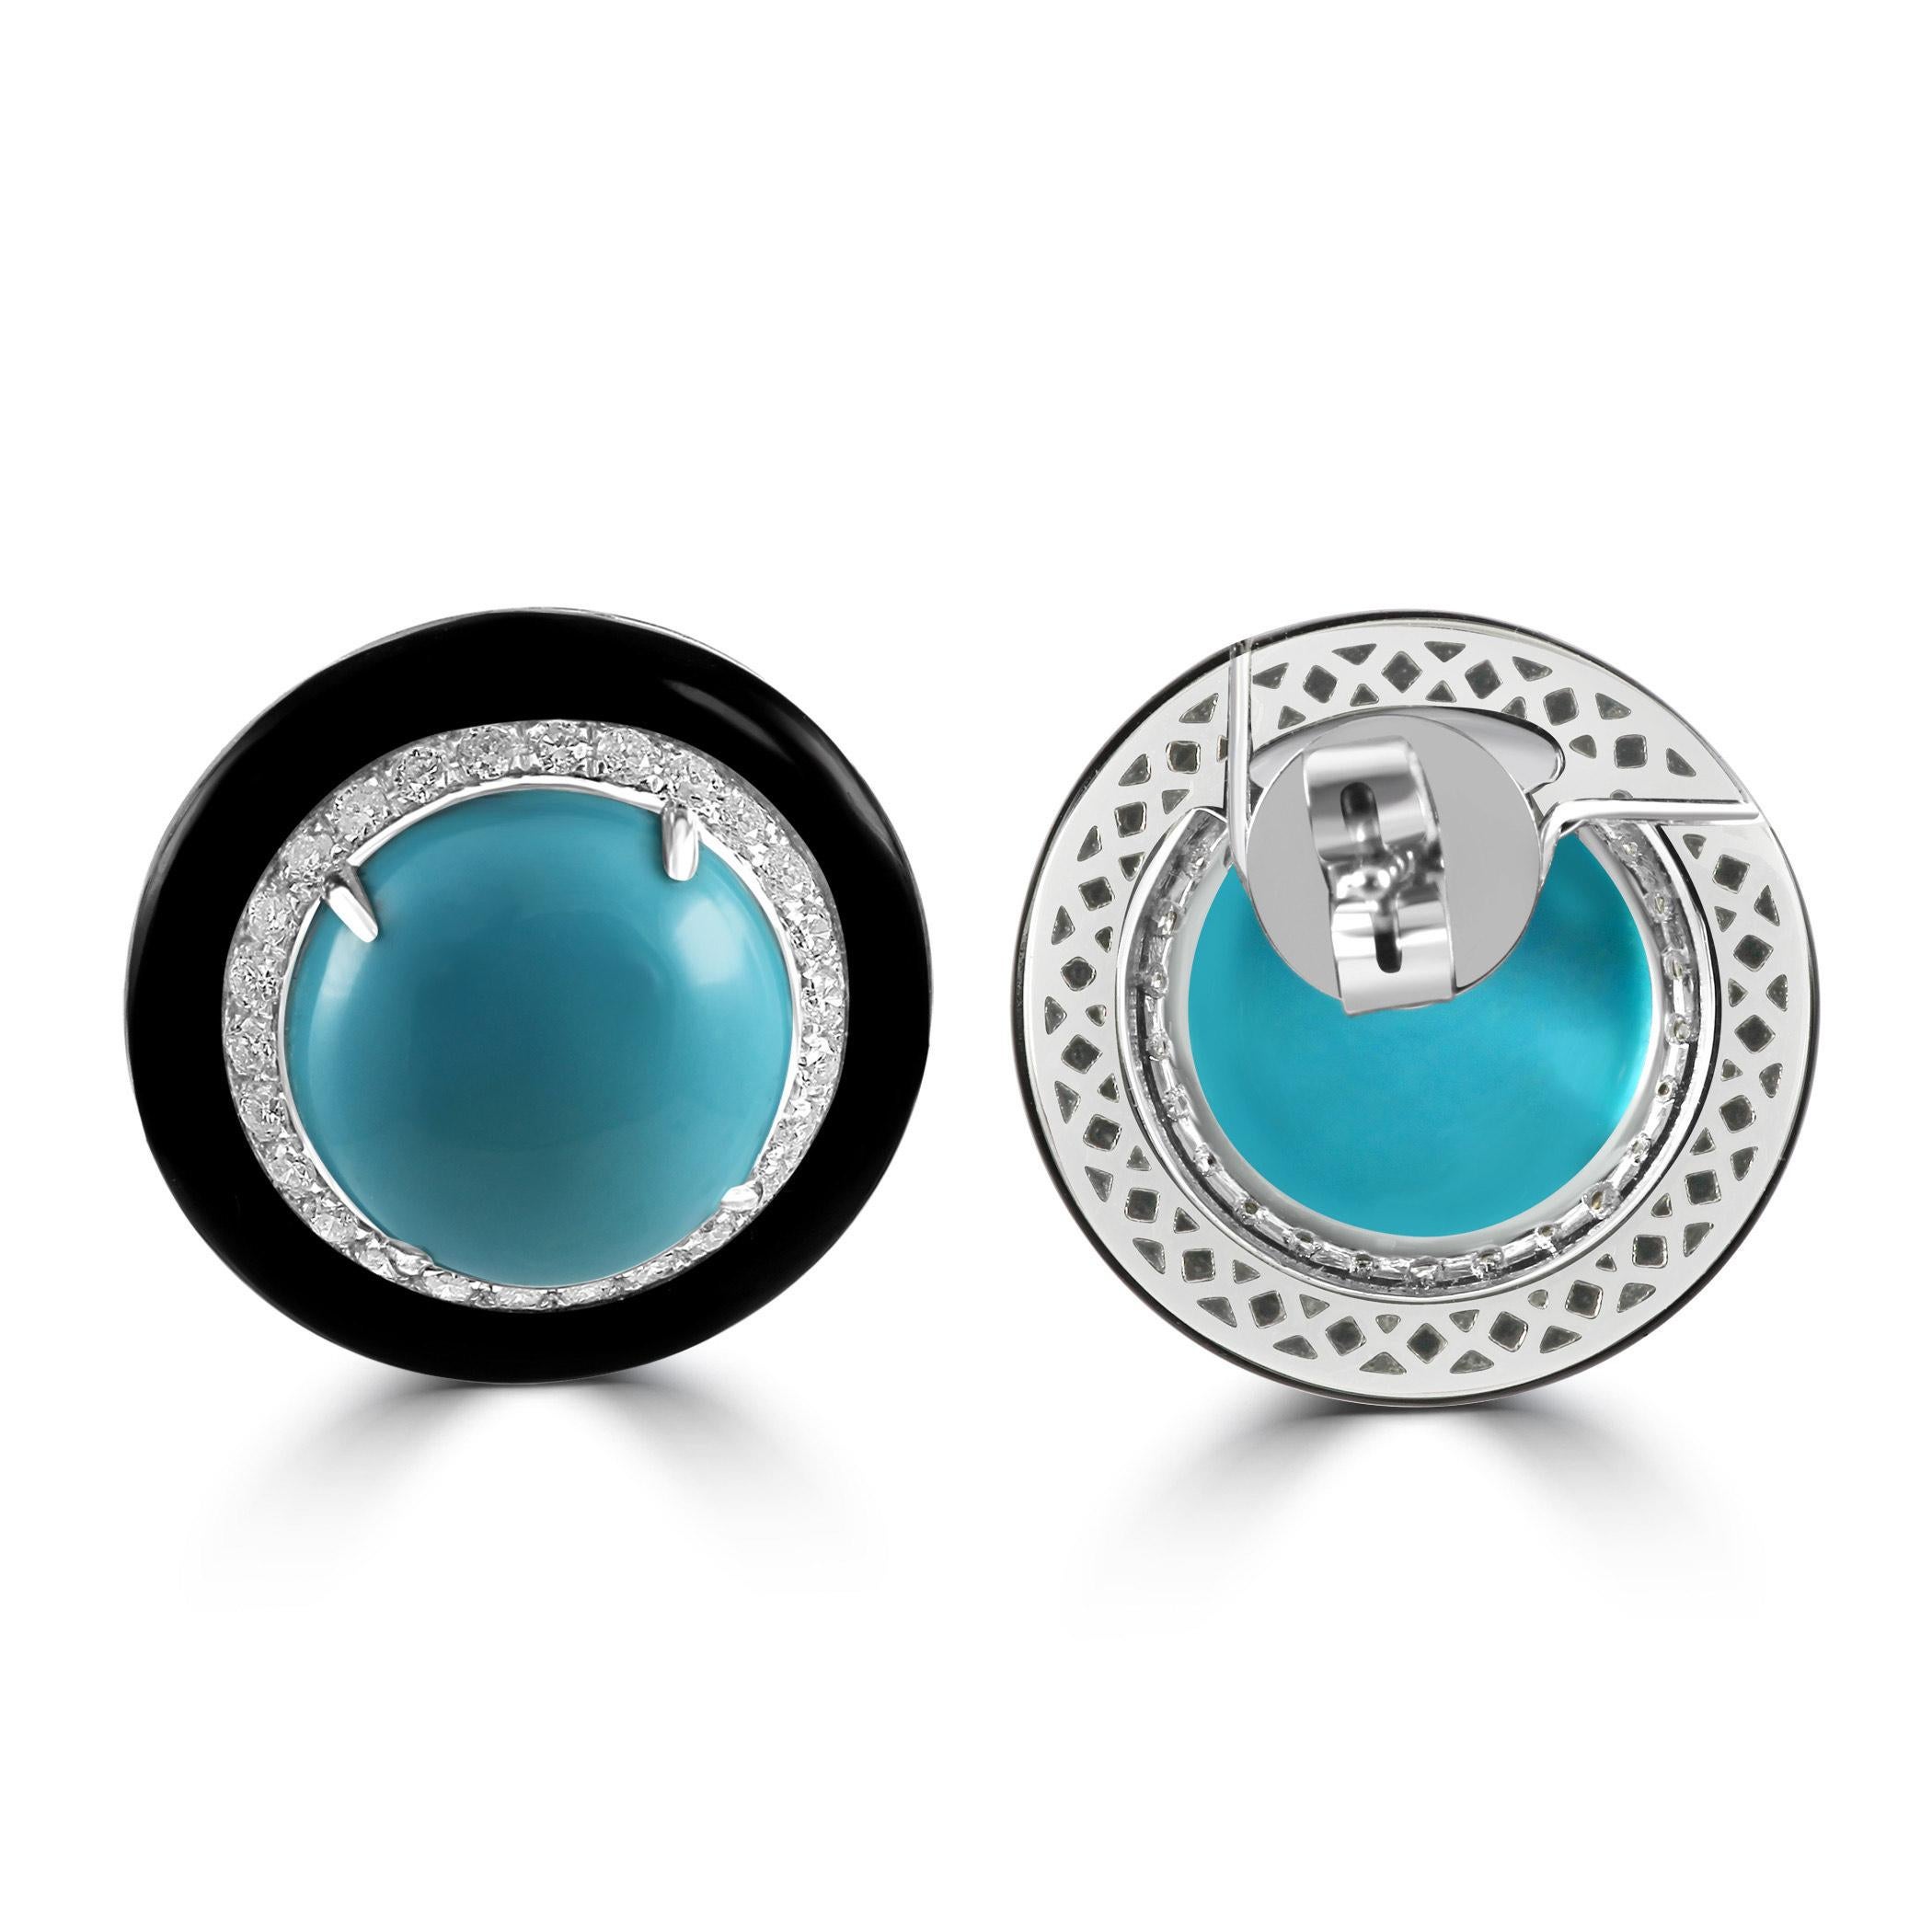 turquoise and black earrings